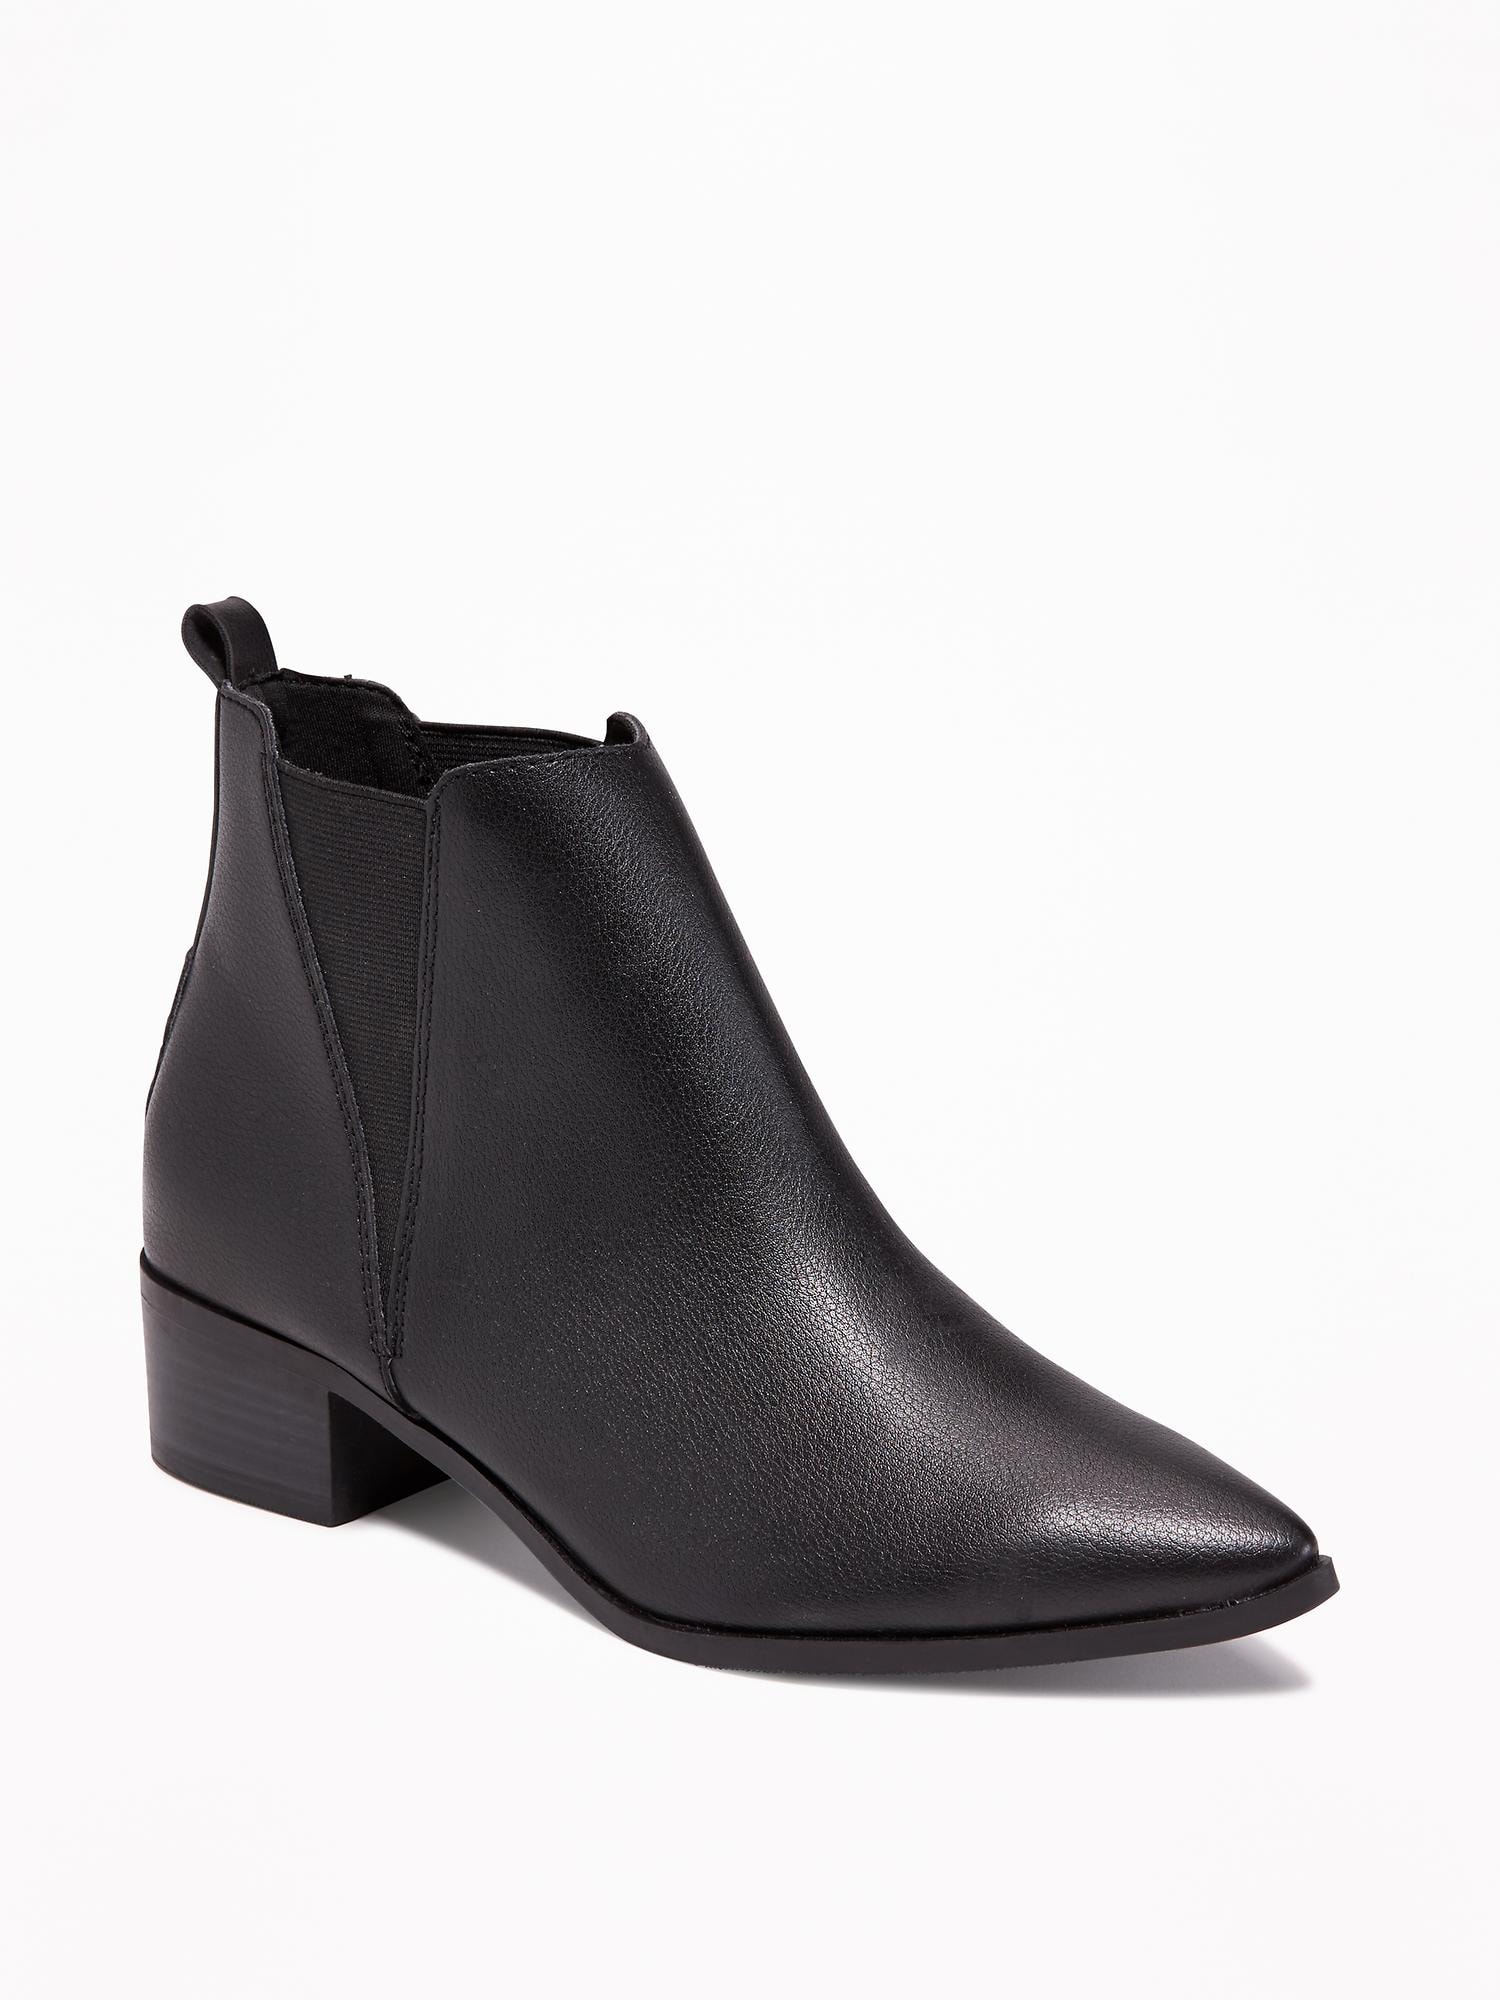 Faux-Leather Pointy Boots for Women | Old Navy